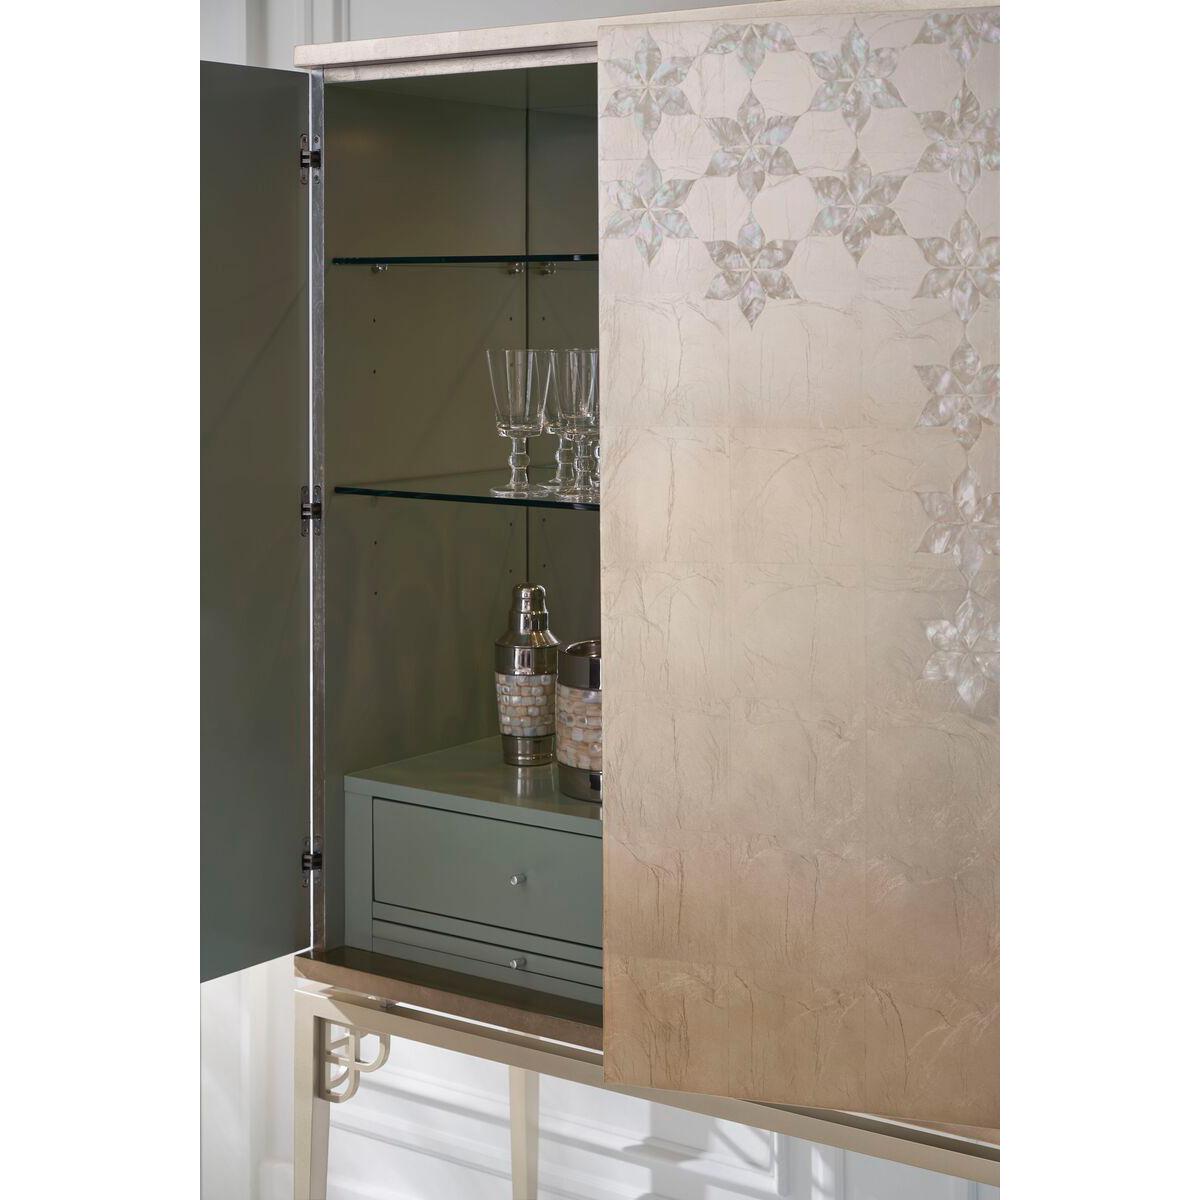 Its doors are detailed with Mother of Pearl accents and falling leaves, giving it a touch of luxury. The metal base is finished in a shade called 